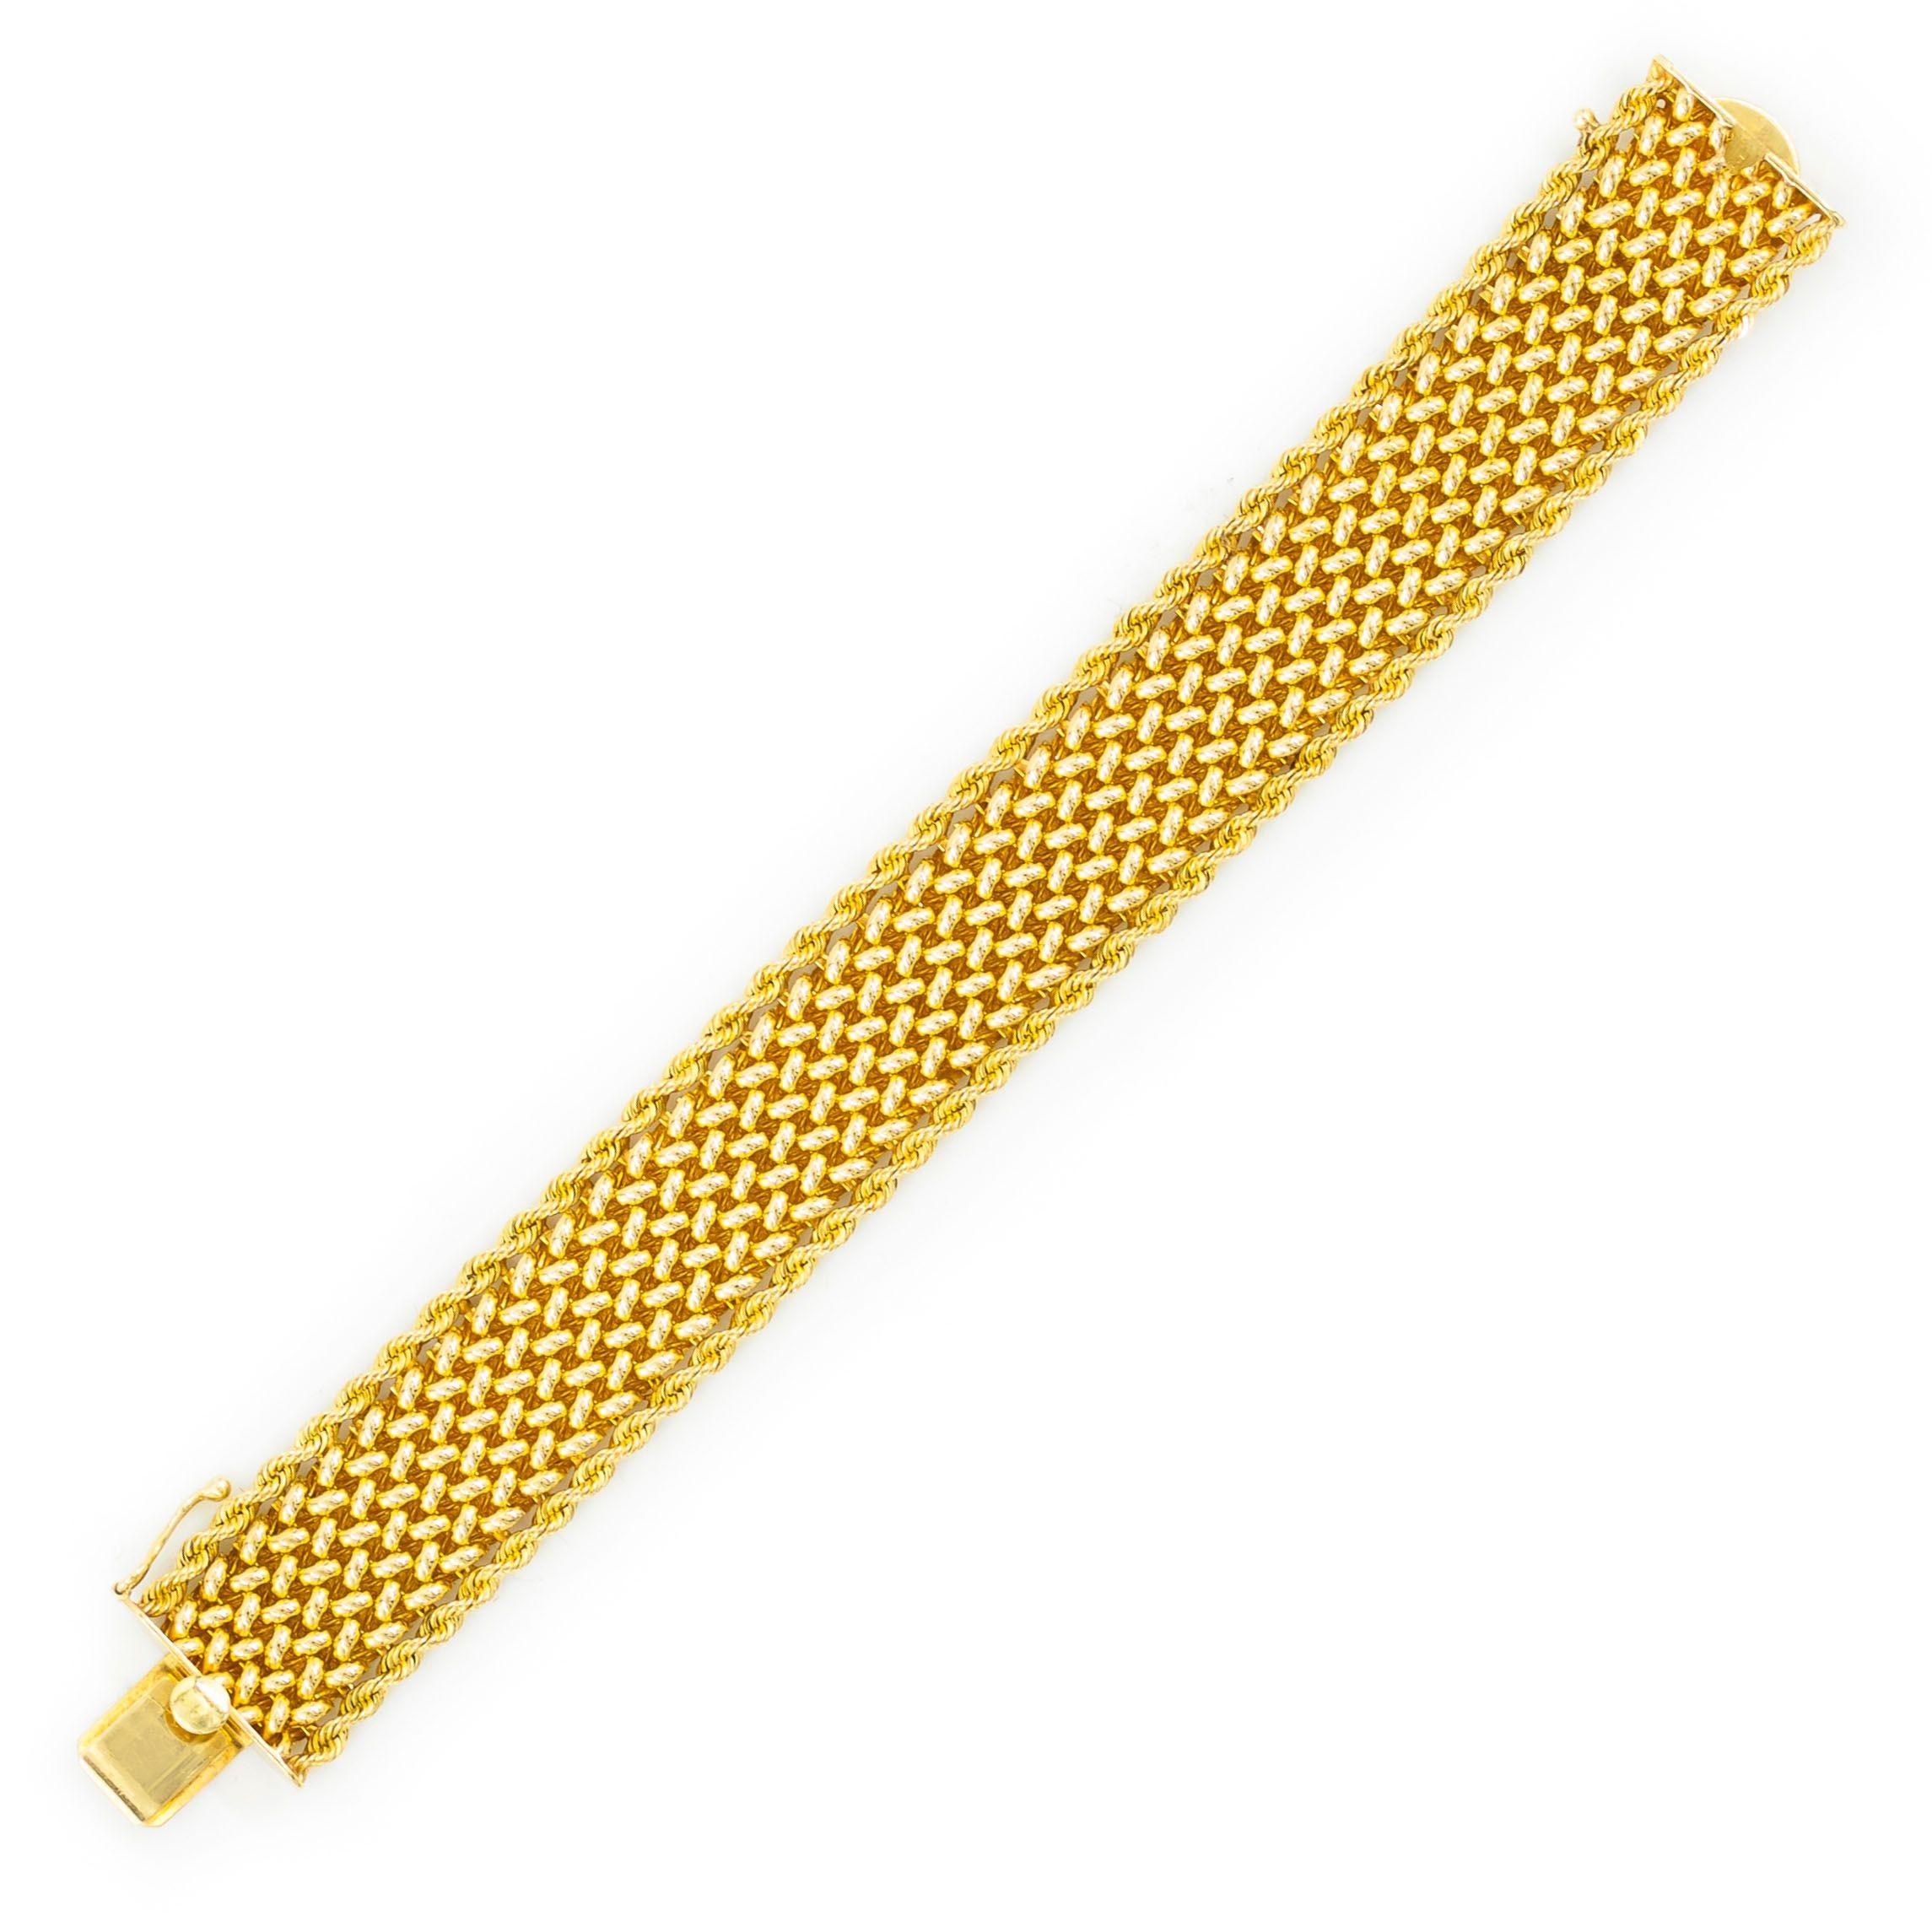 A very attractive and rather substantial vintage bracelet designed by the Los Angeles jeweler Carl D. Linstrom & Sons entirely in 14 karat yellow gold to include a silky woven mesh body with a twisted-rope edging. The angles of the rope edge and the